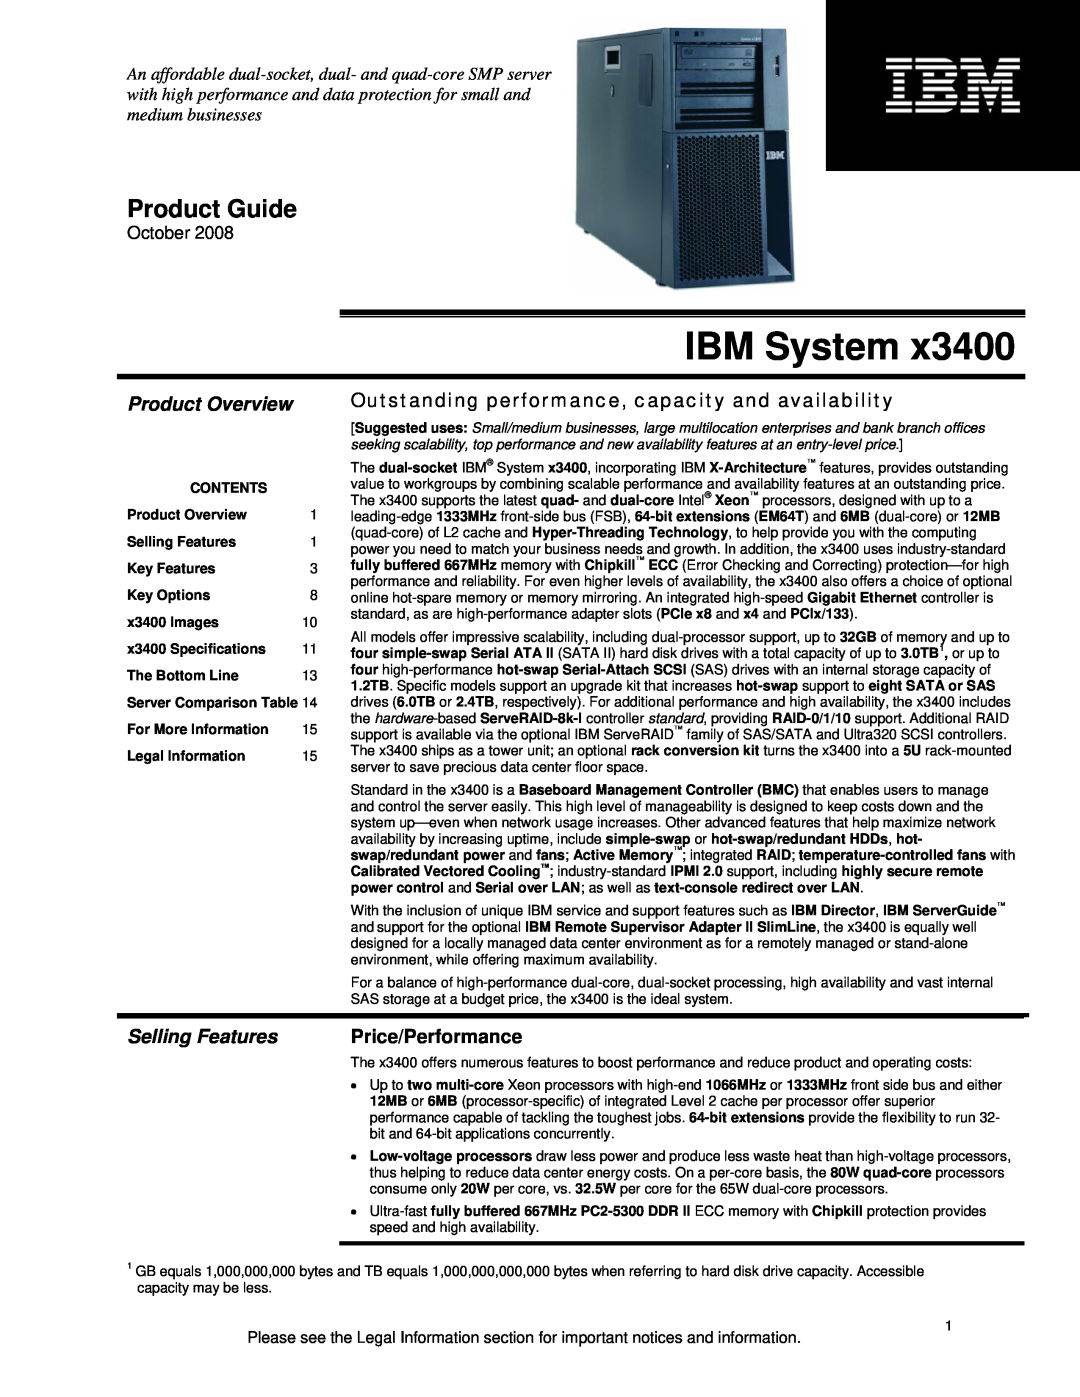 IBM x3400 specifications Product Overview, Selling Features, Price/Performance, October, IBM System, Product Guide 